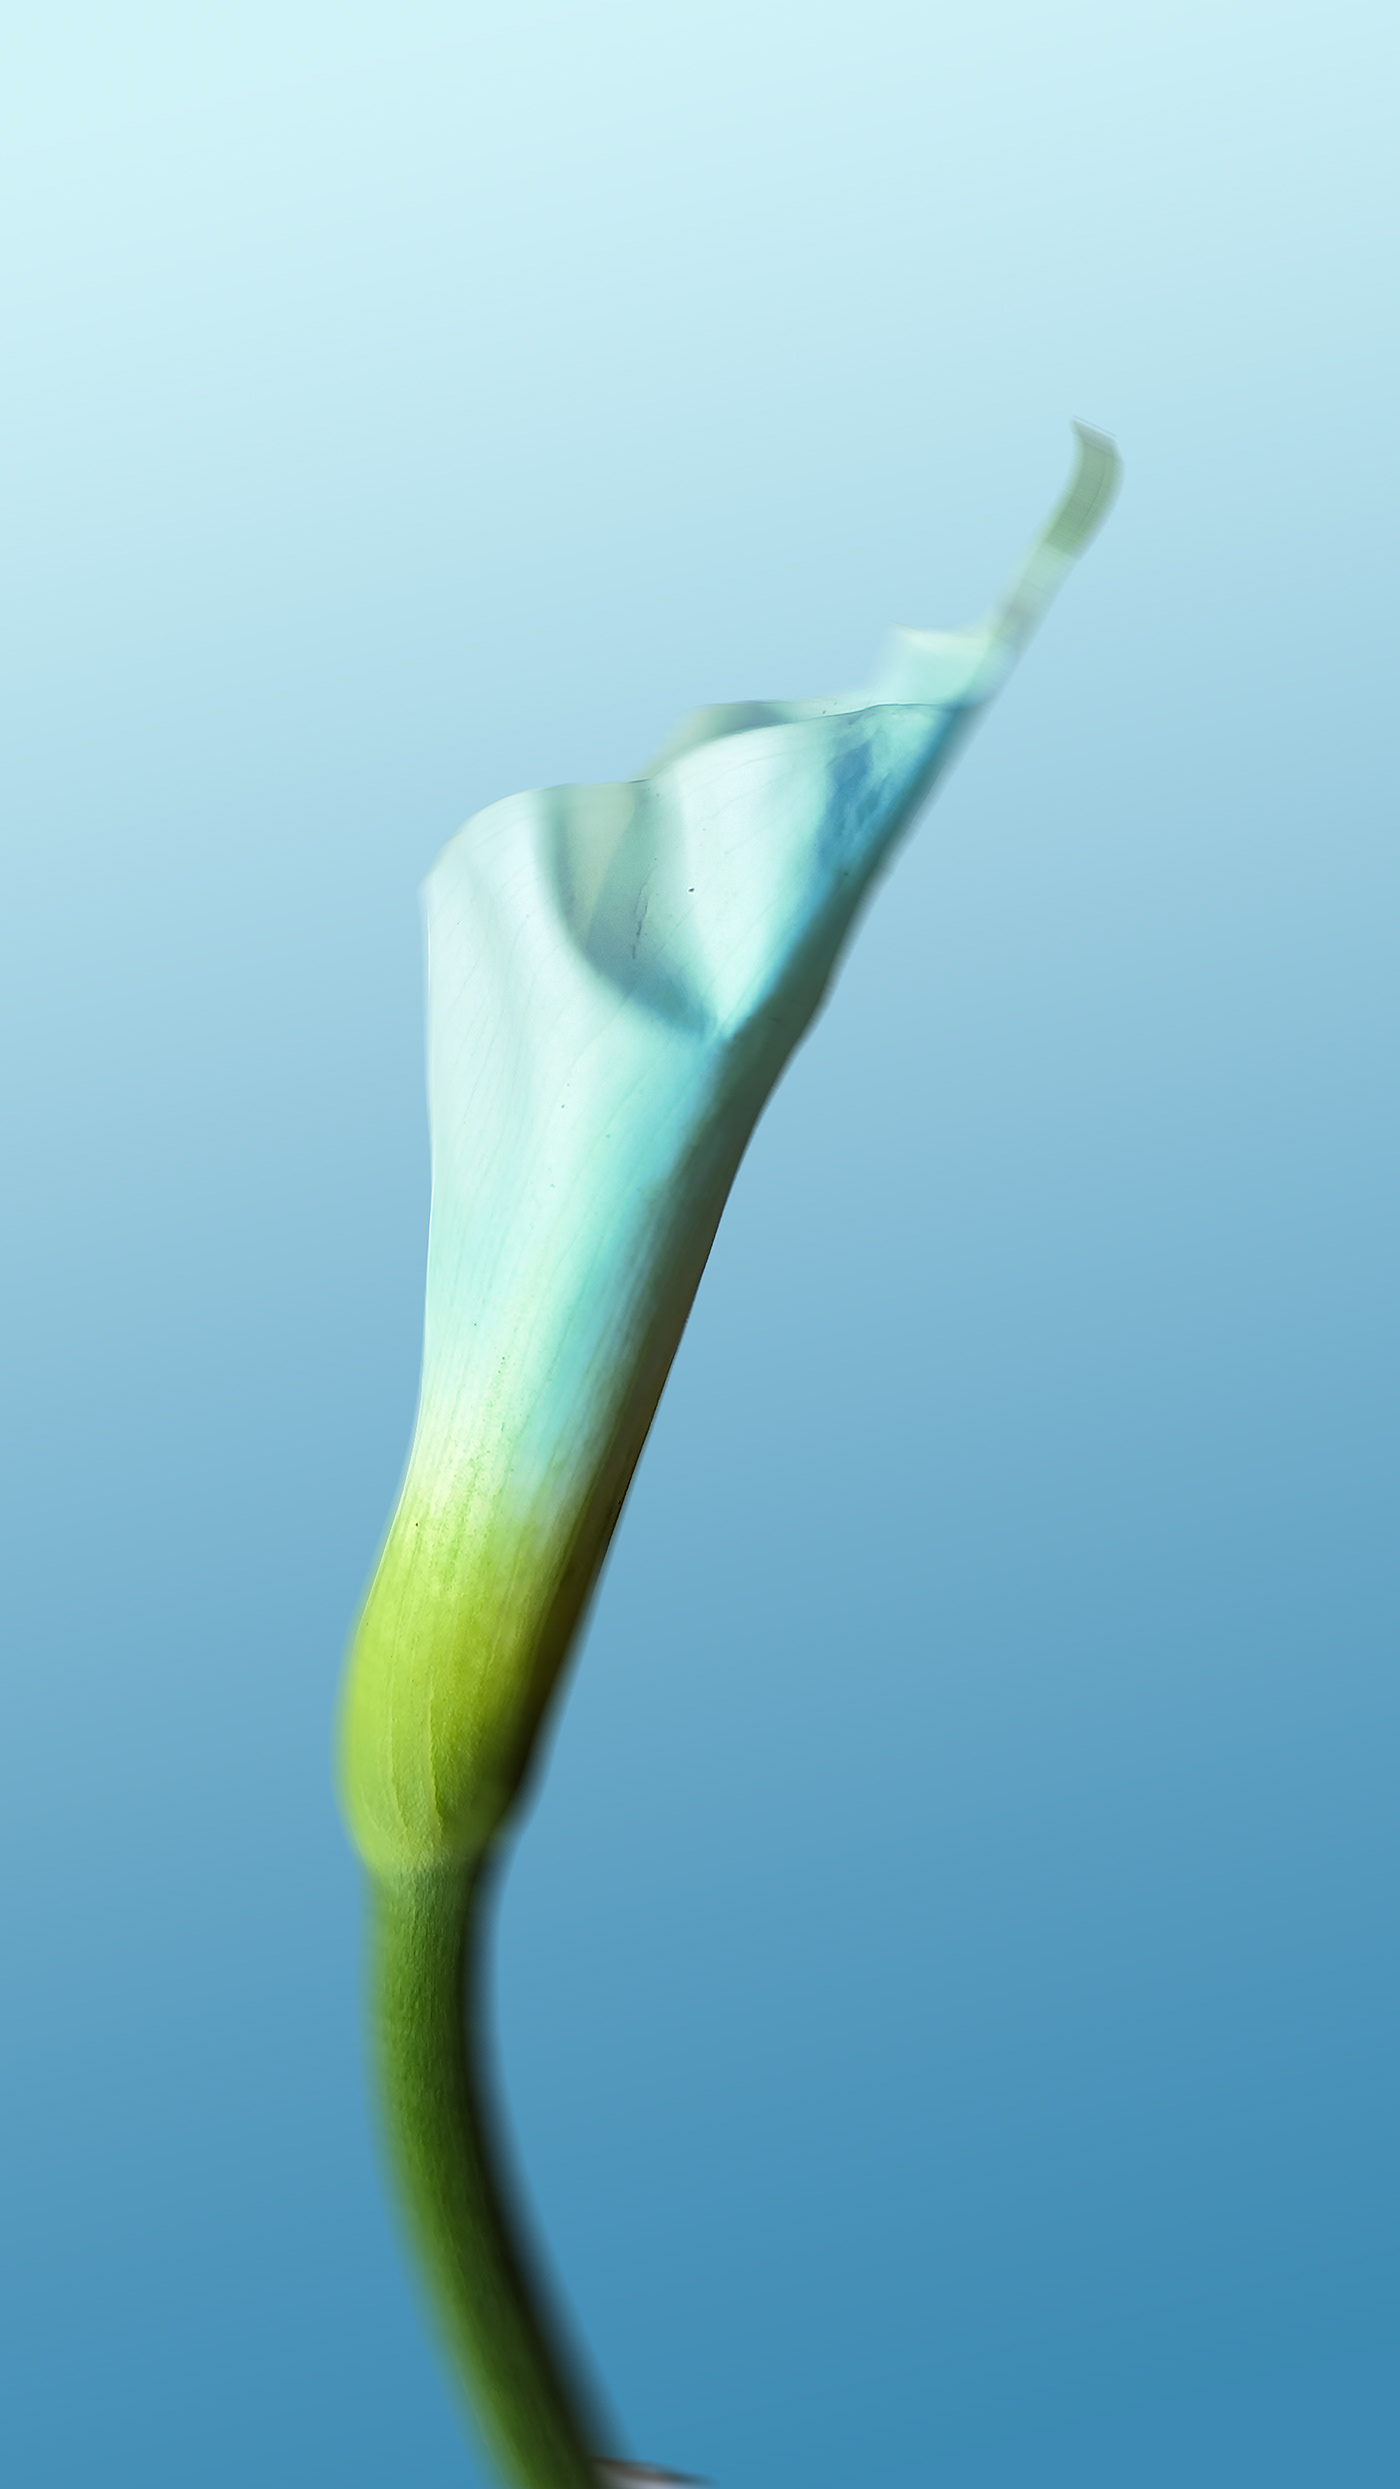 photographer Photography  floral Flowers Nature photoshop lily rose Macro Photography shelby hanlon